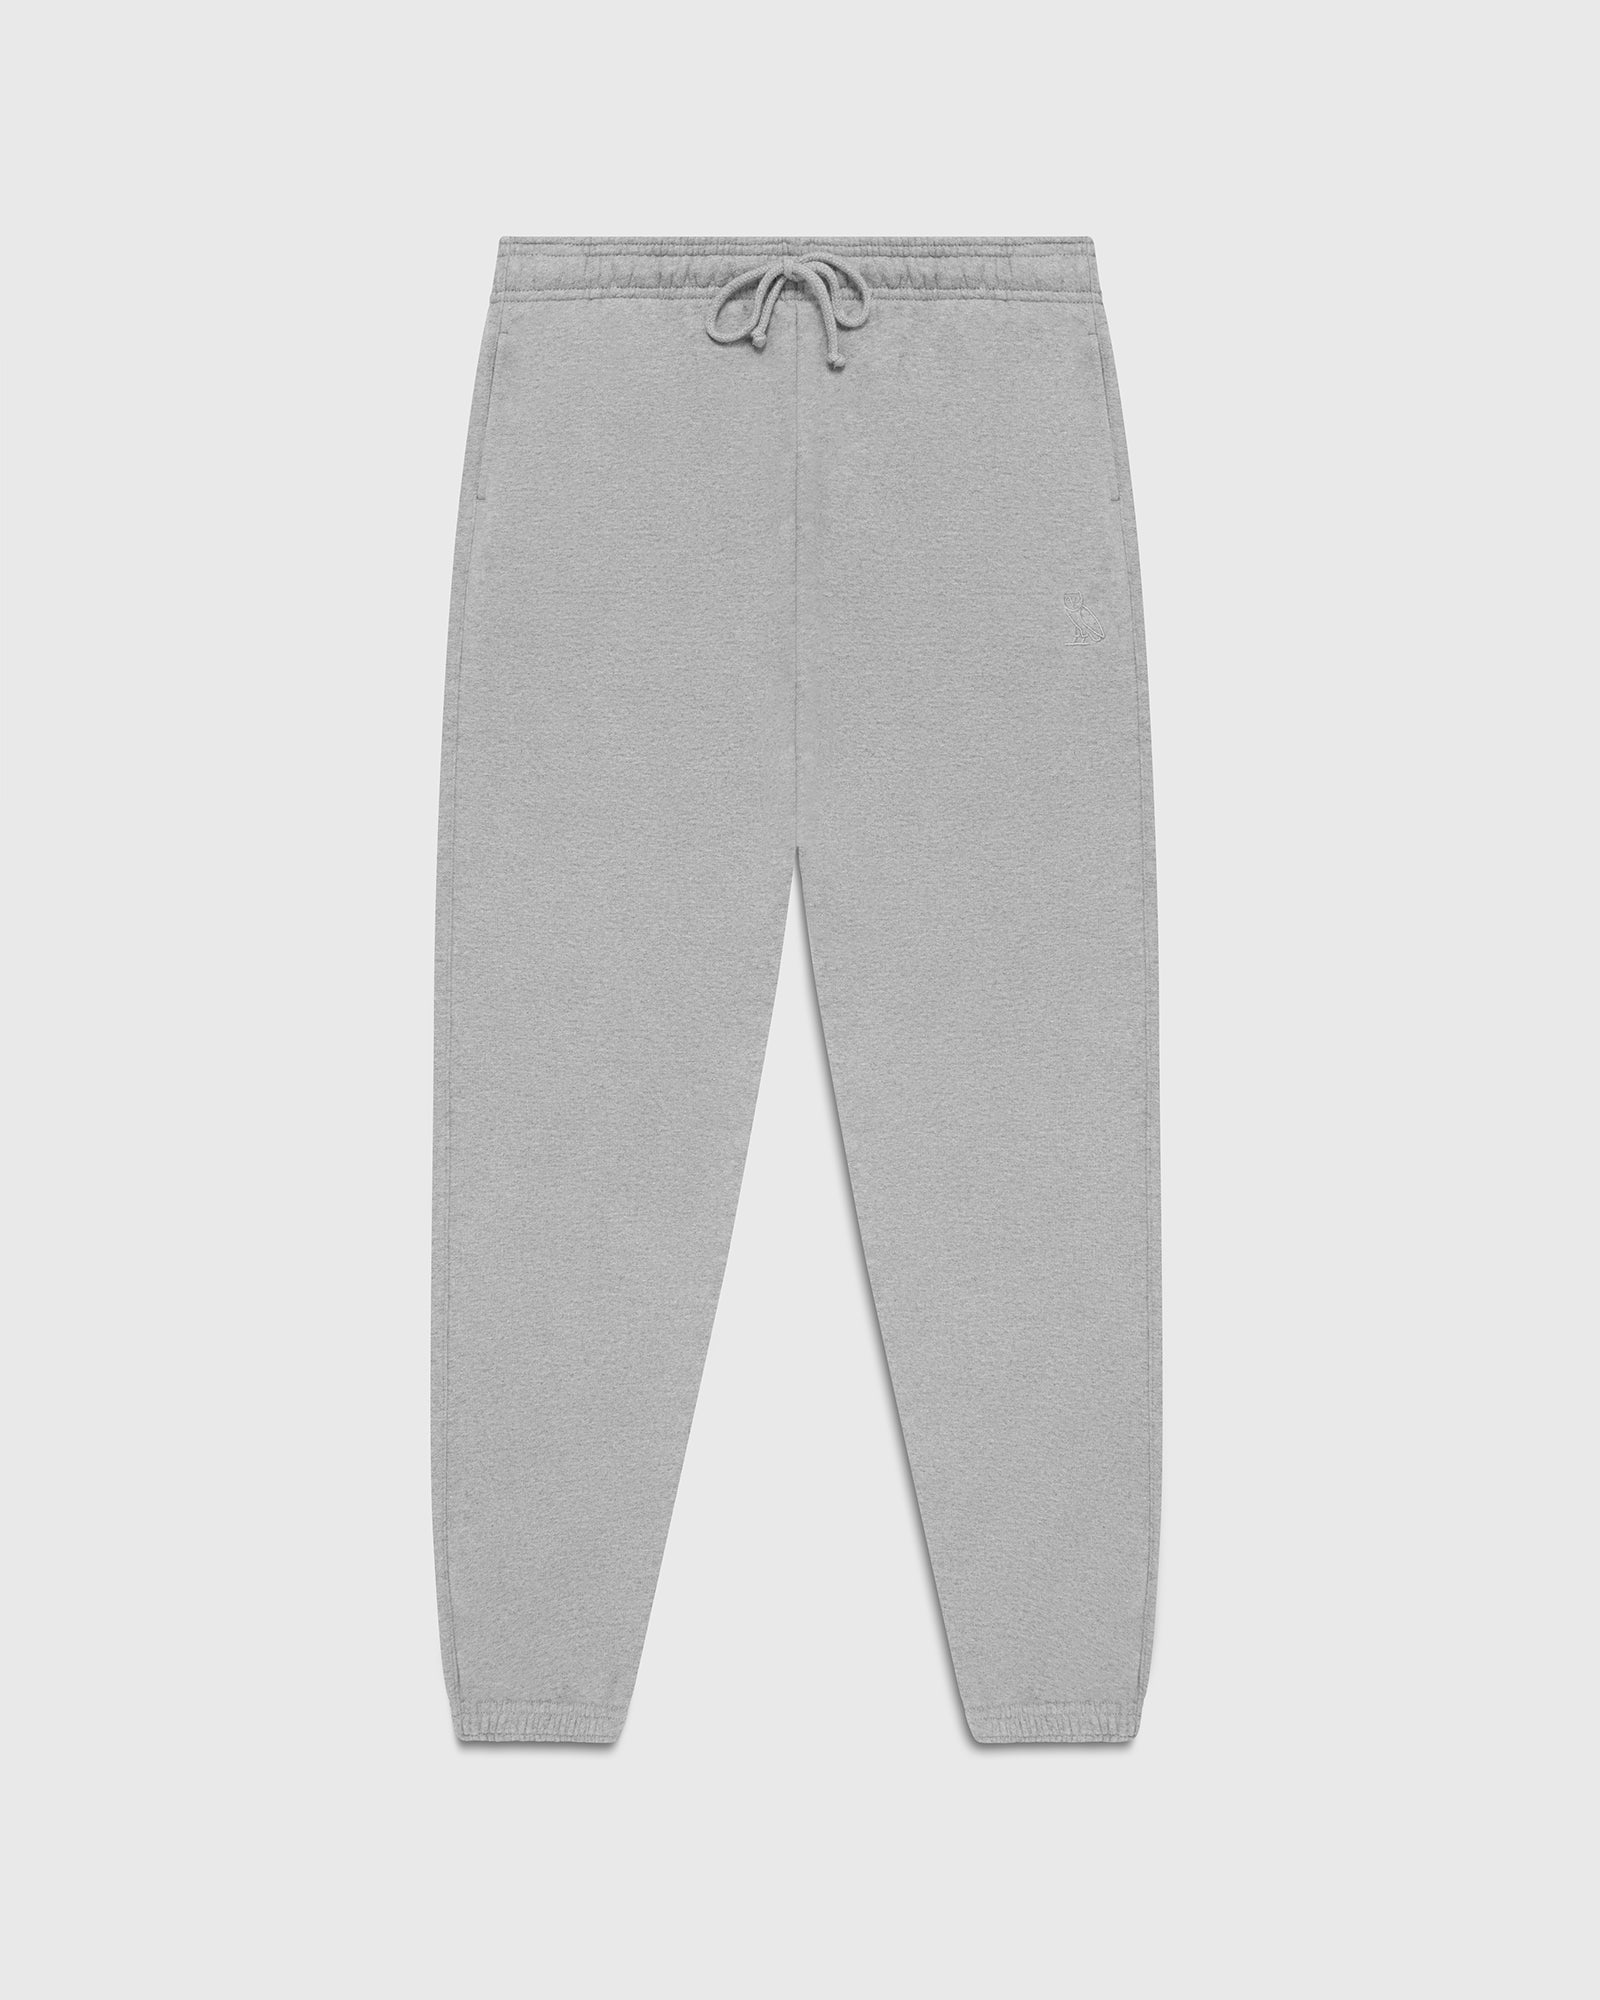 Relaxed Fit Sweatpant - Heather Grey - October's Very Own